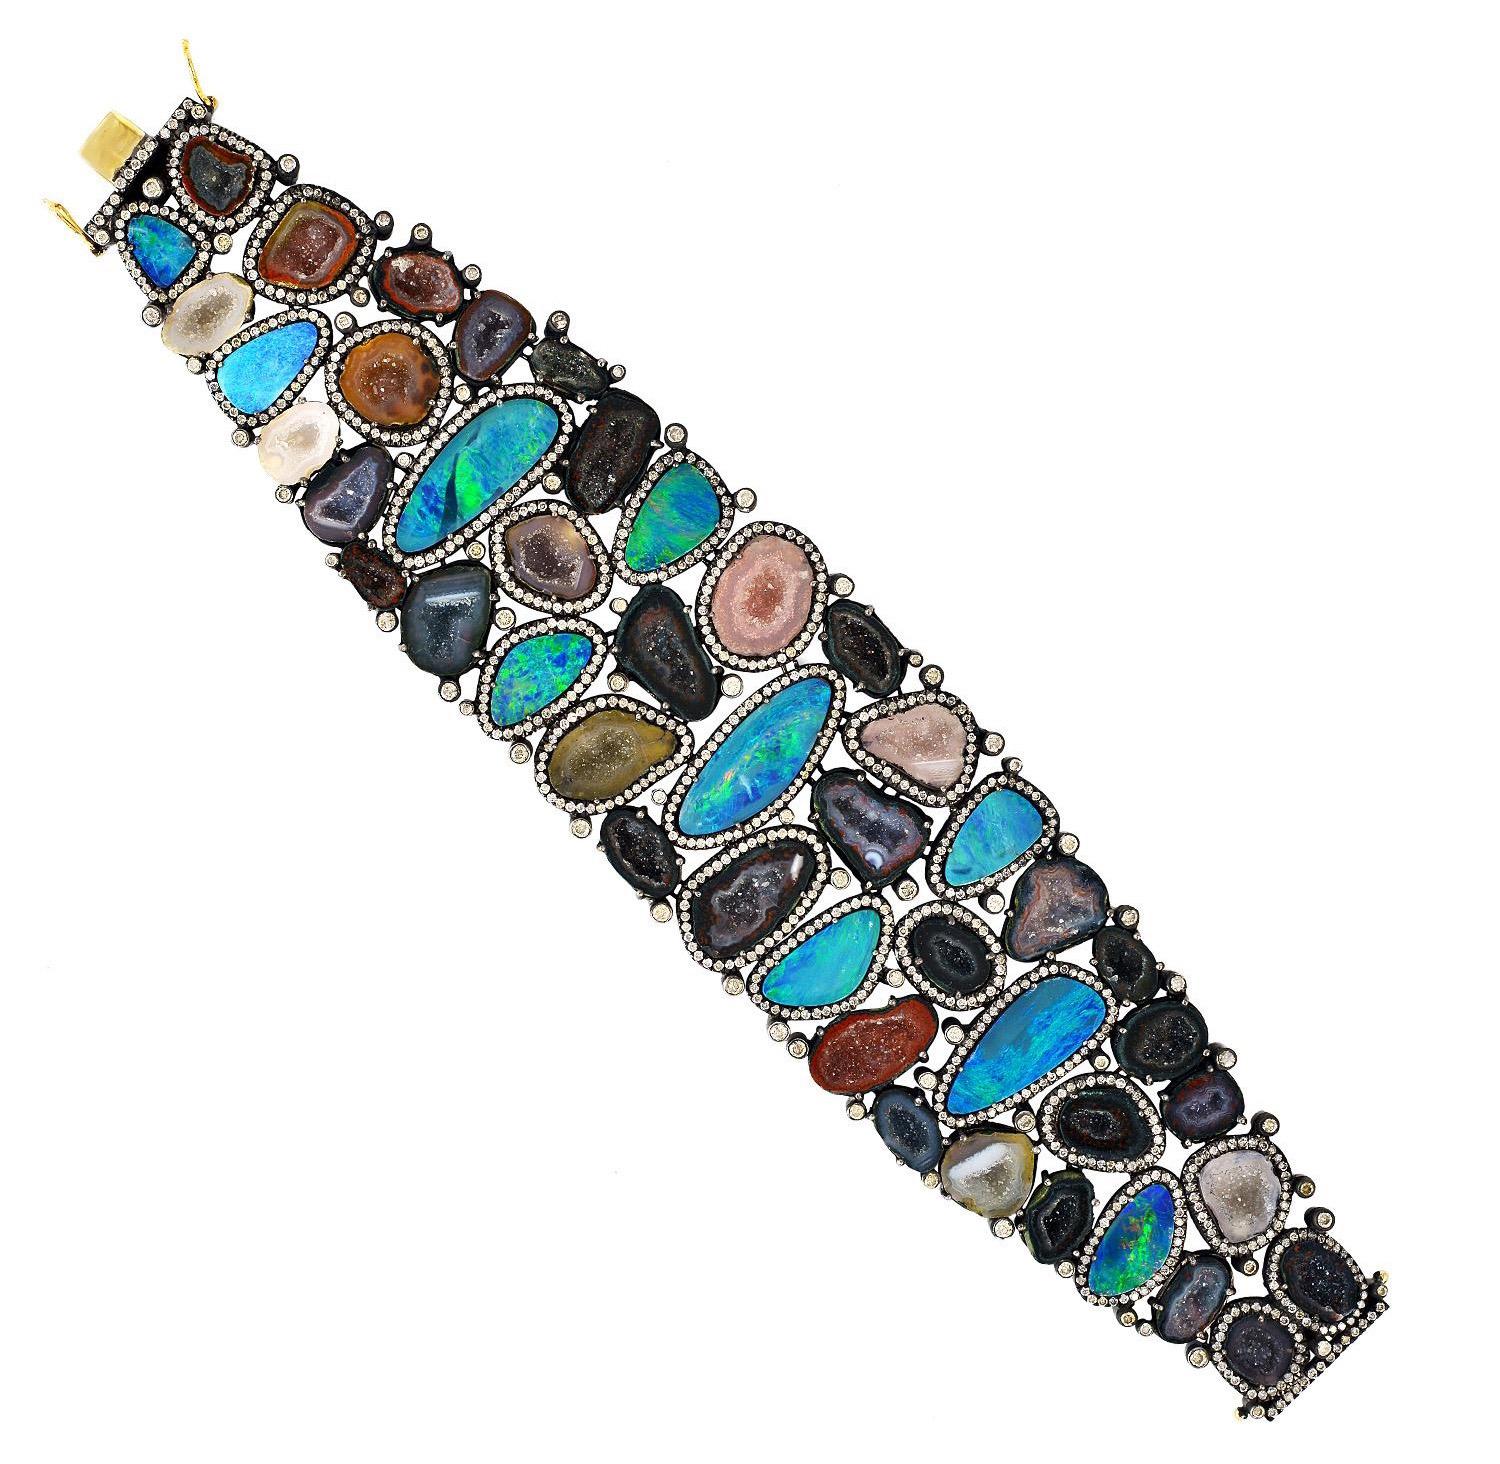 A stunning bracelet handmade in 18K gold and sterling silver. It is set in 25.221 carats of opal doublets, geodes and 7.477 carats diamonds. Pair this with your favorite evening dress for a red carpet look. Clasp Closure

Composition
Size-190